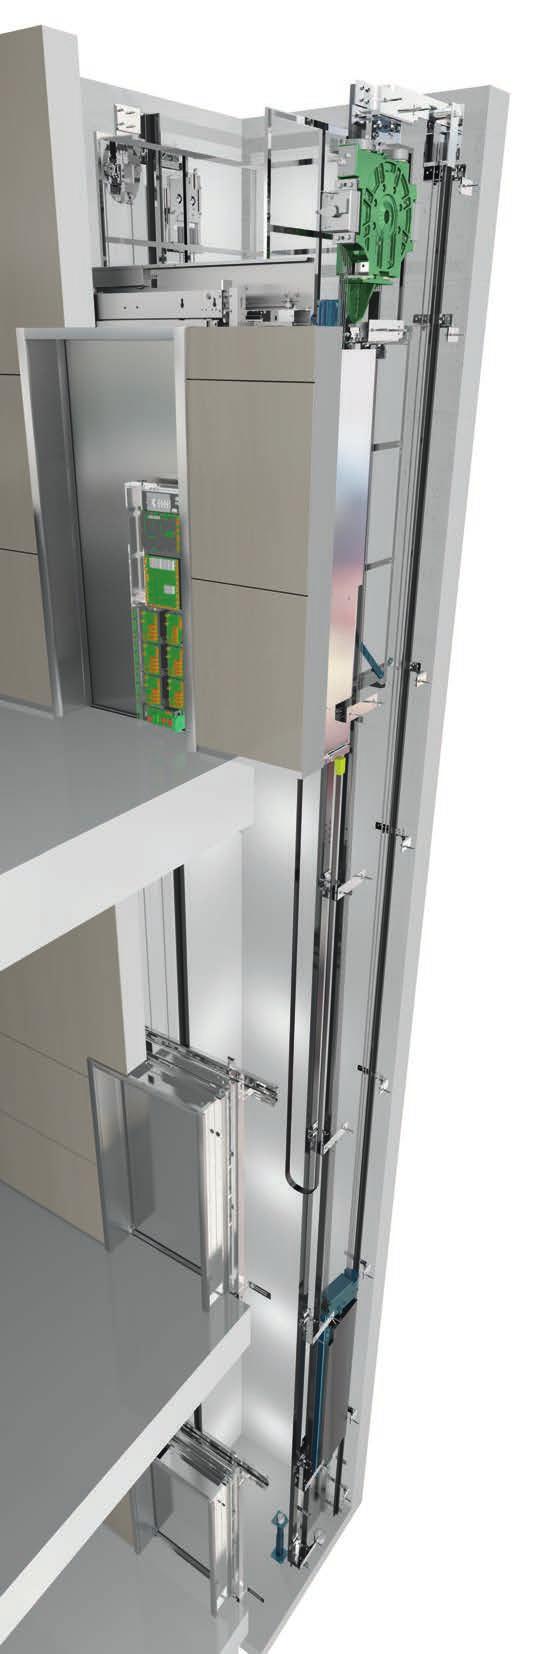 The revolutionary machine room-less elevator concept KONE s machine room-less (MRL) technology eliminates the need for a machine or control room by attaching the hoisting machine to the guide rail,